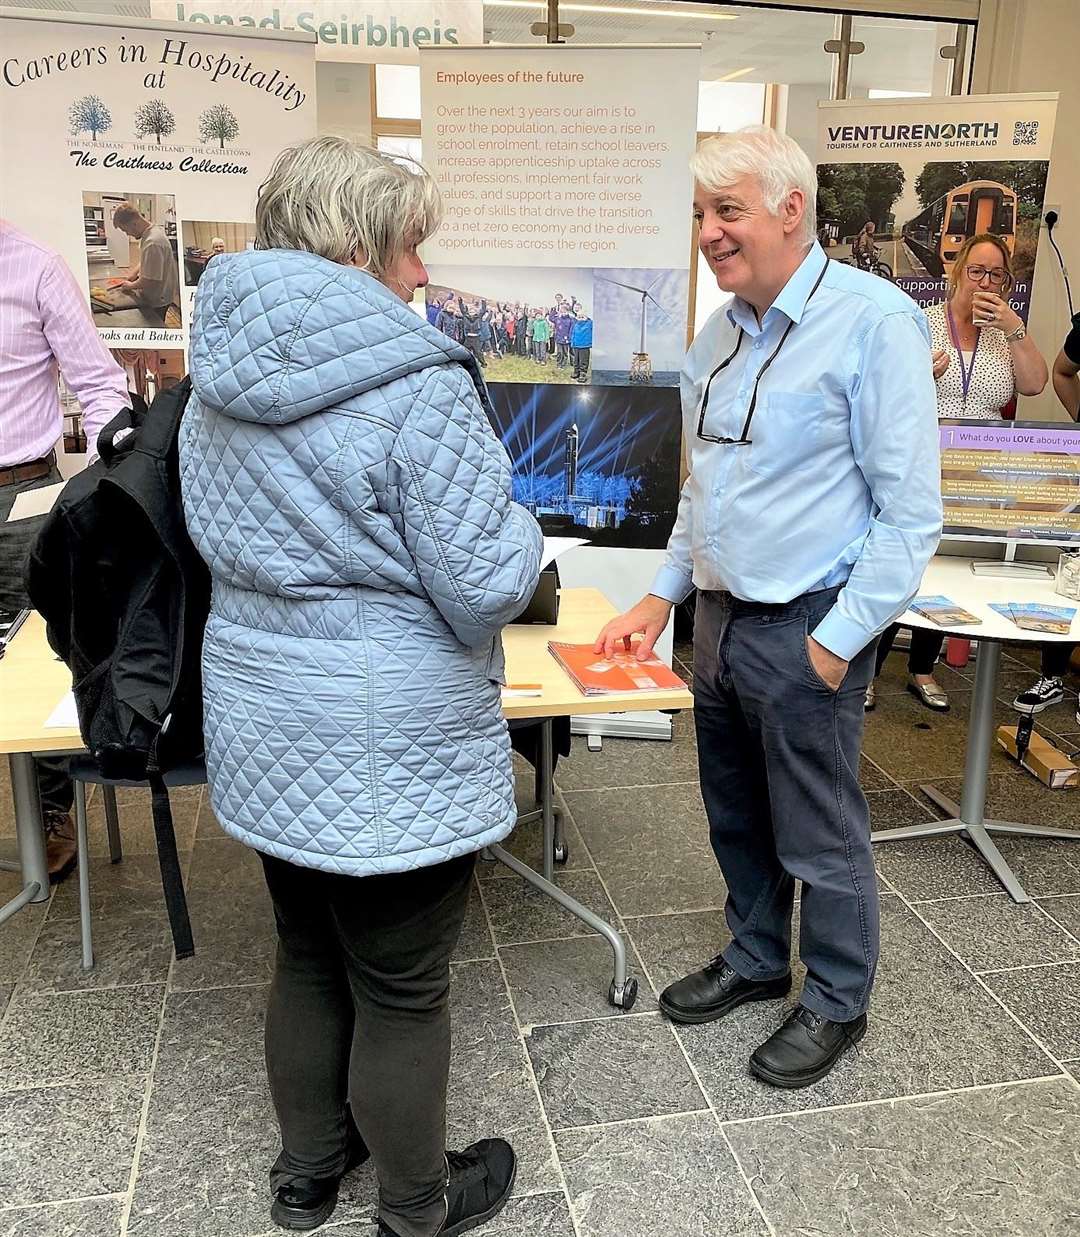 Peter Faccenda from Focus North speaking with a member of the public at the event on July 25.